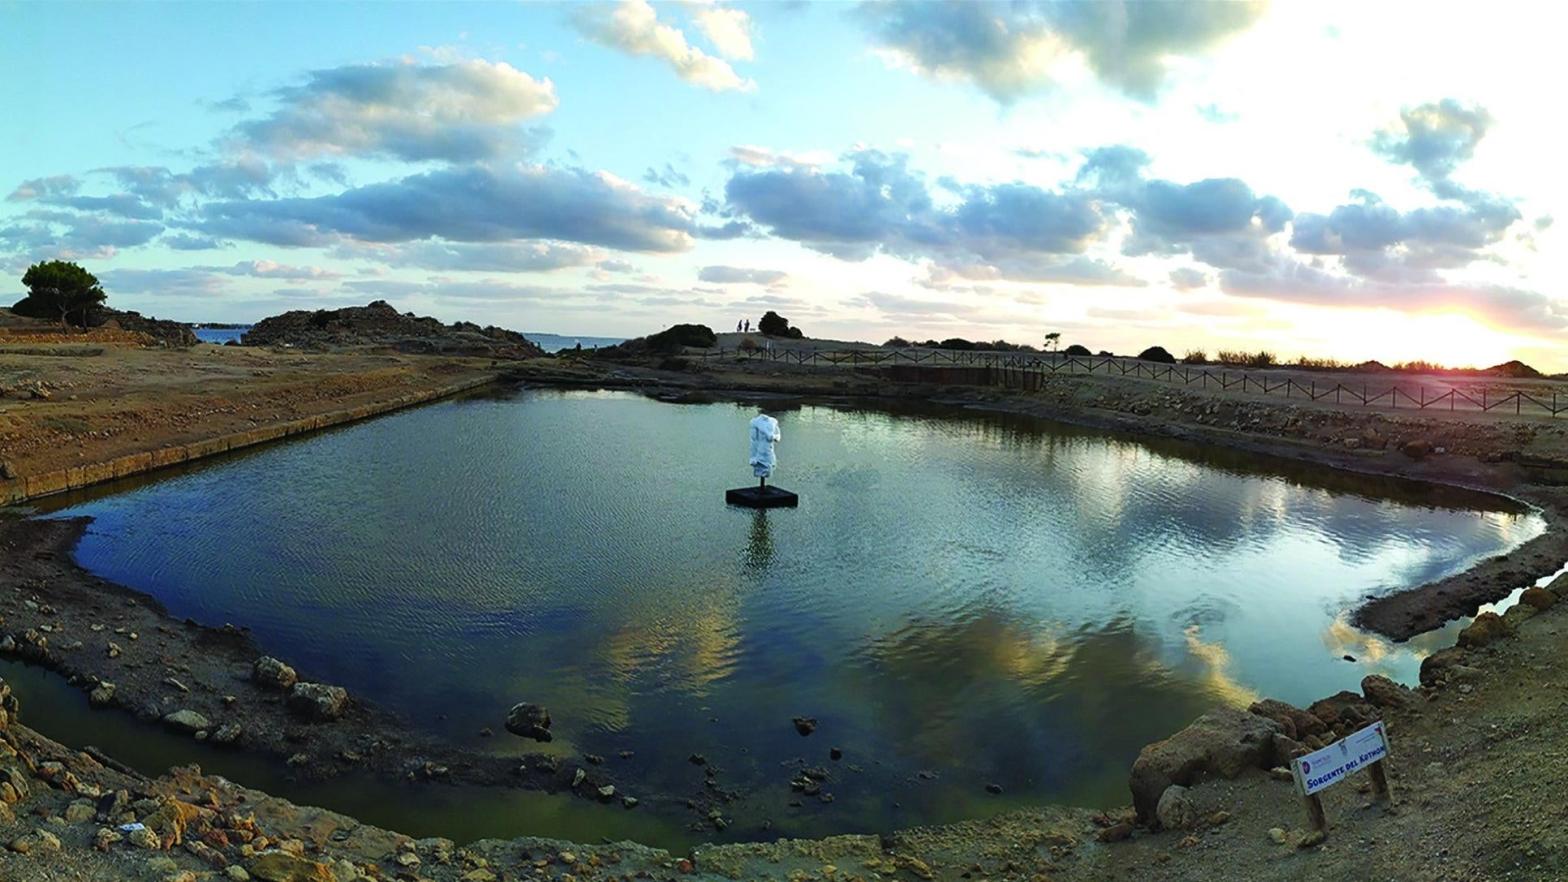 Upon completion of the excavations, the basin was refilled with water and replica statue placed on the pedestal at centre.  (Photo: Sapienza University of Rome Expedition to Motya)